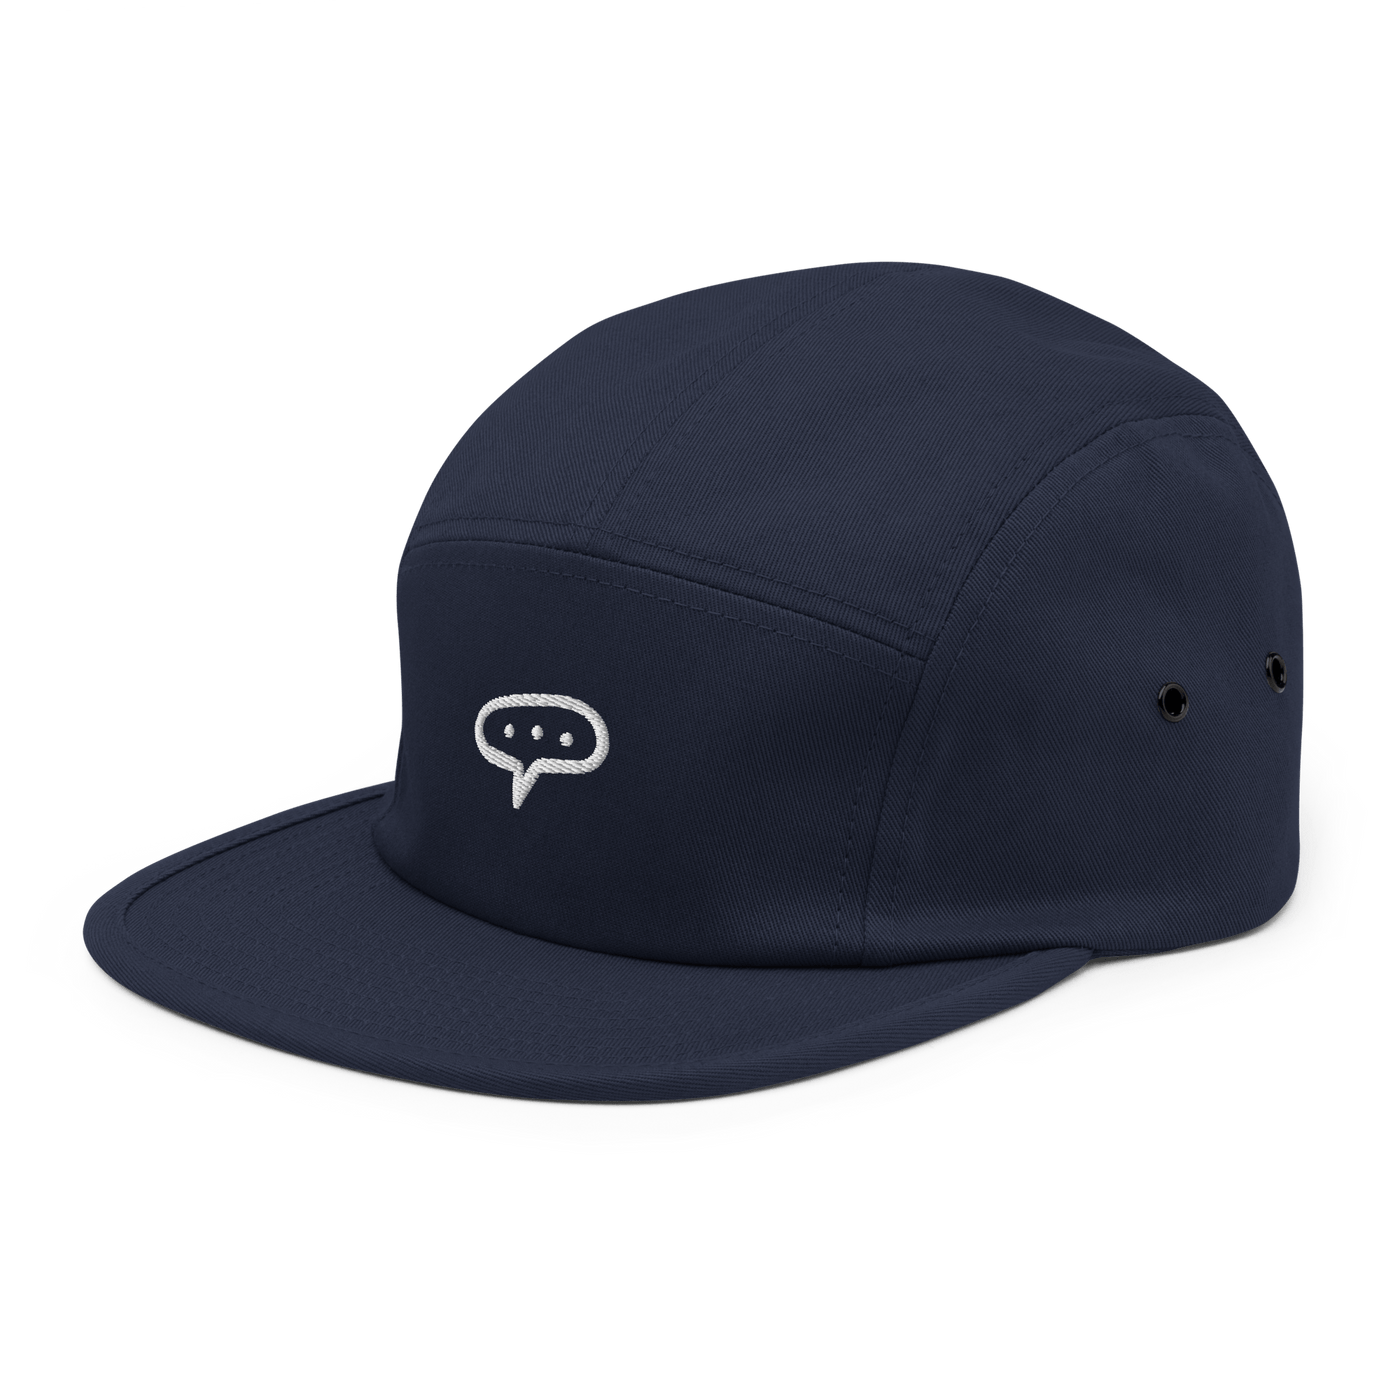 Thinking Five Panel Cap - Navy - - Just Another Cap Store